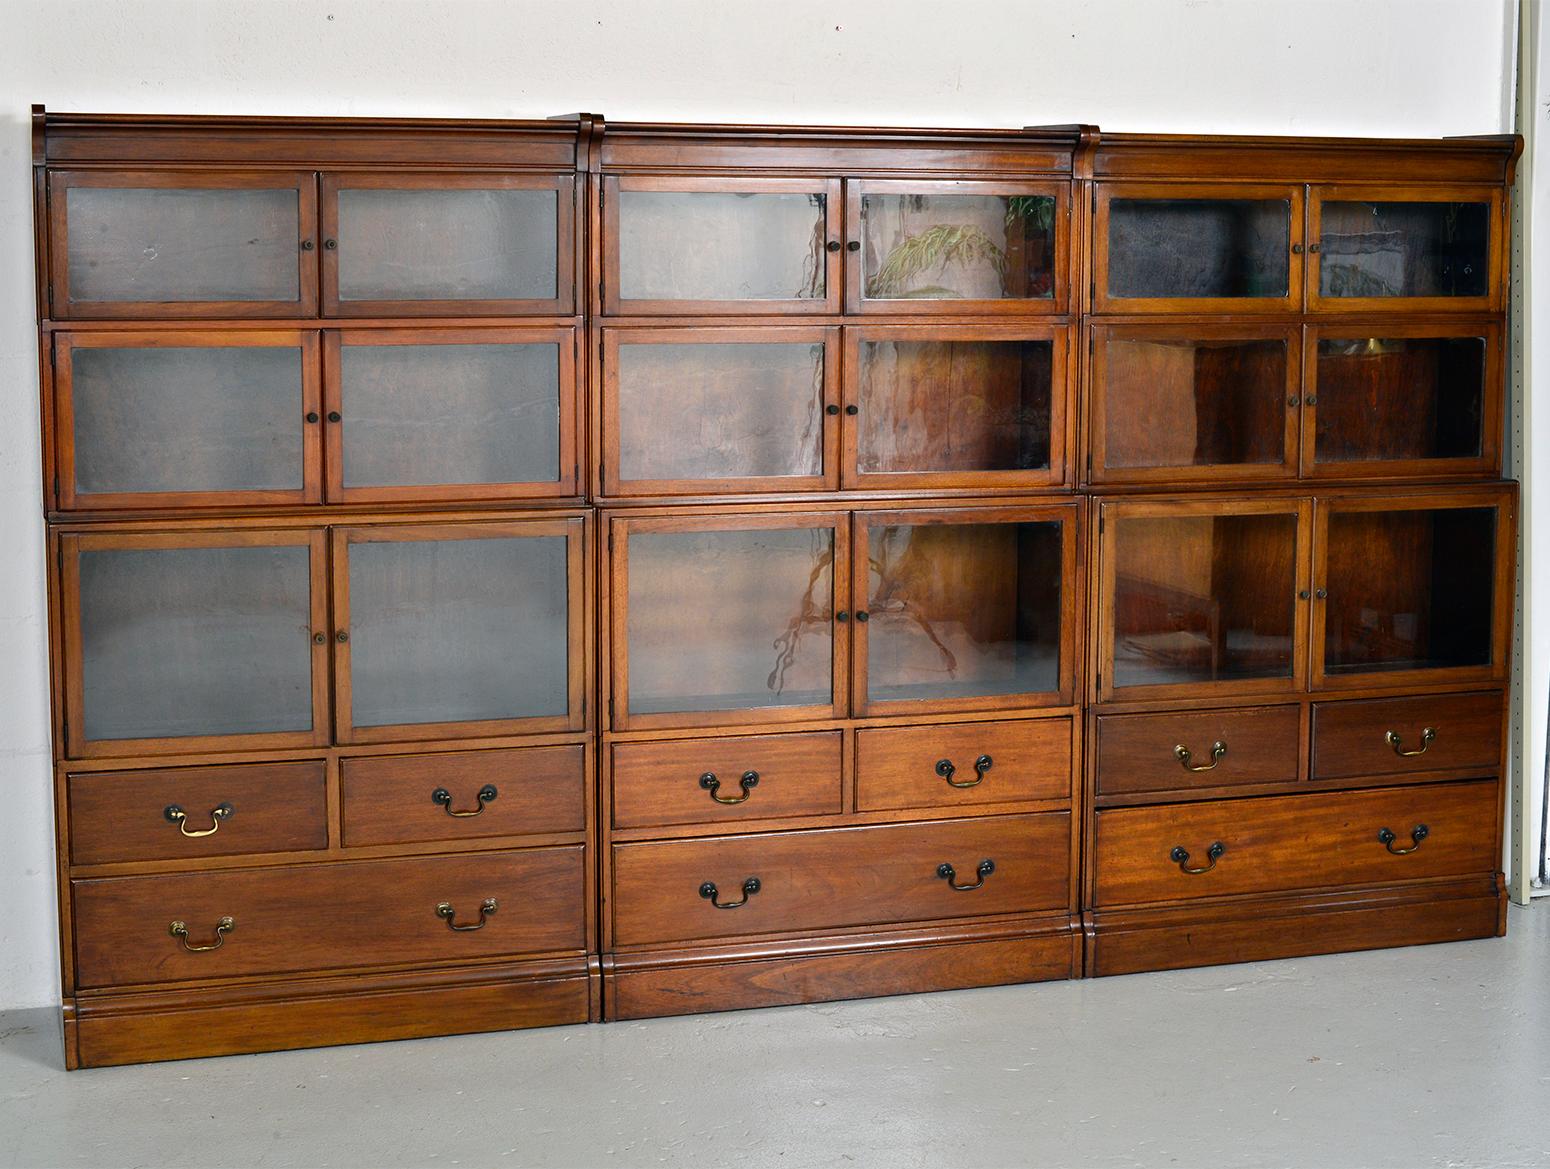 British 1920s Minty Barristers Modular Mahogany Library Bookcases Drawers Cabinets